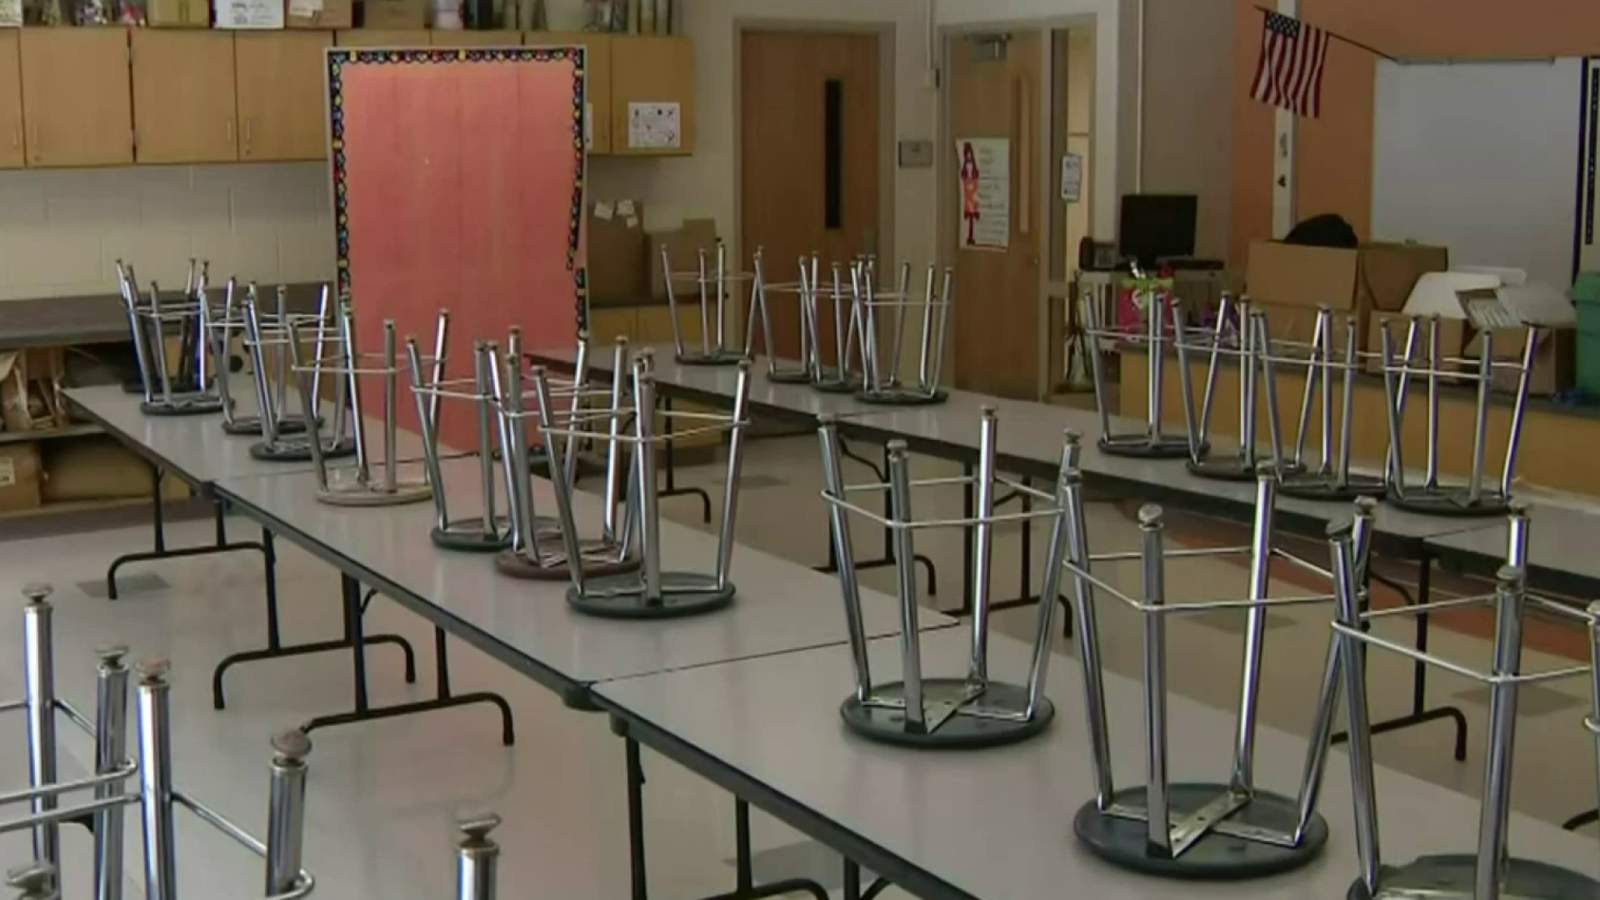 Van Dyke Public Schools district has some students returning to classrooms this week